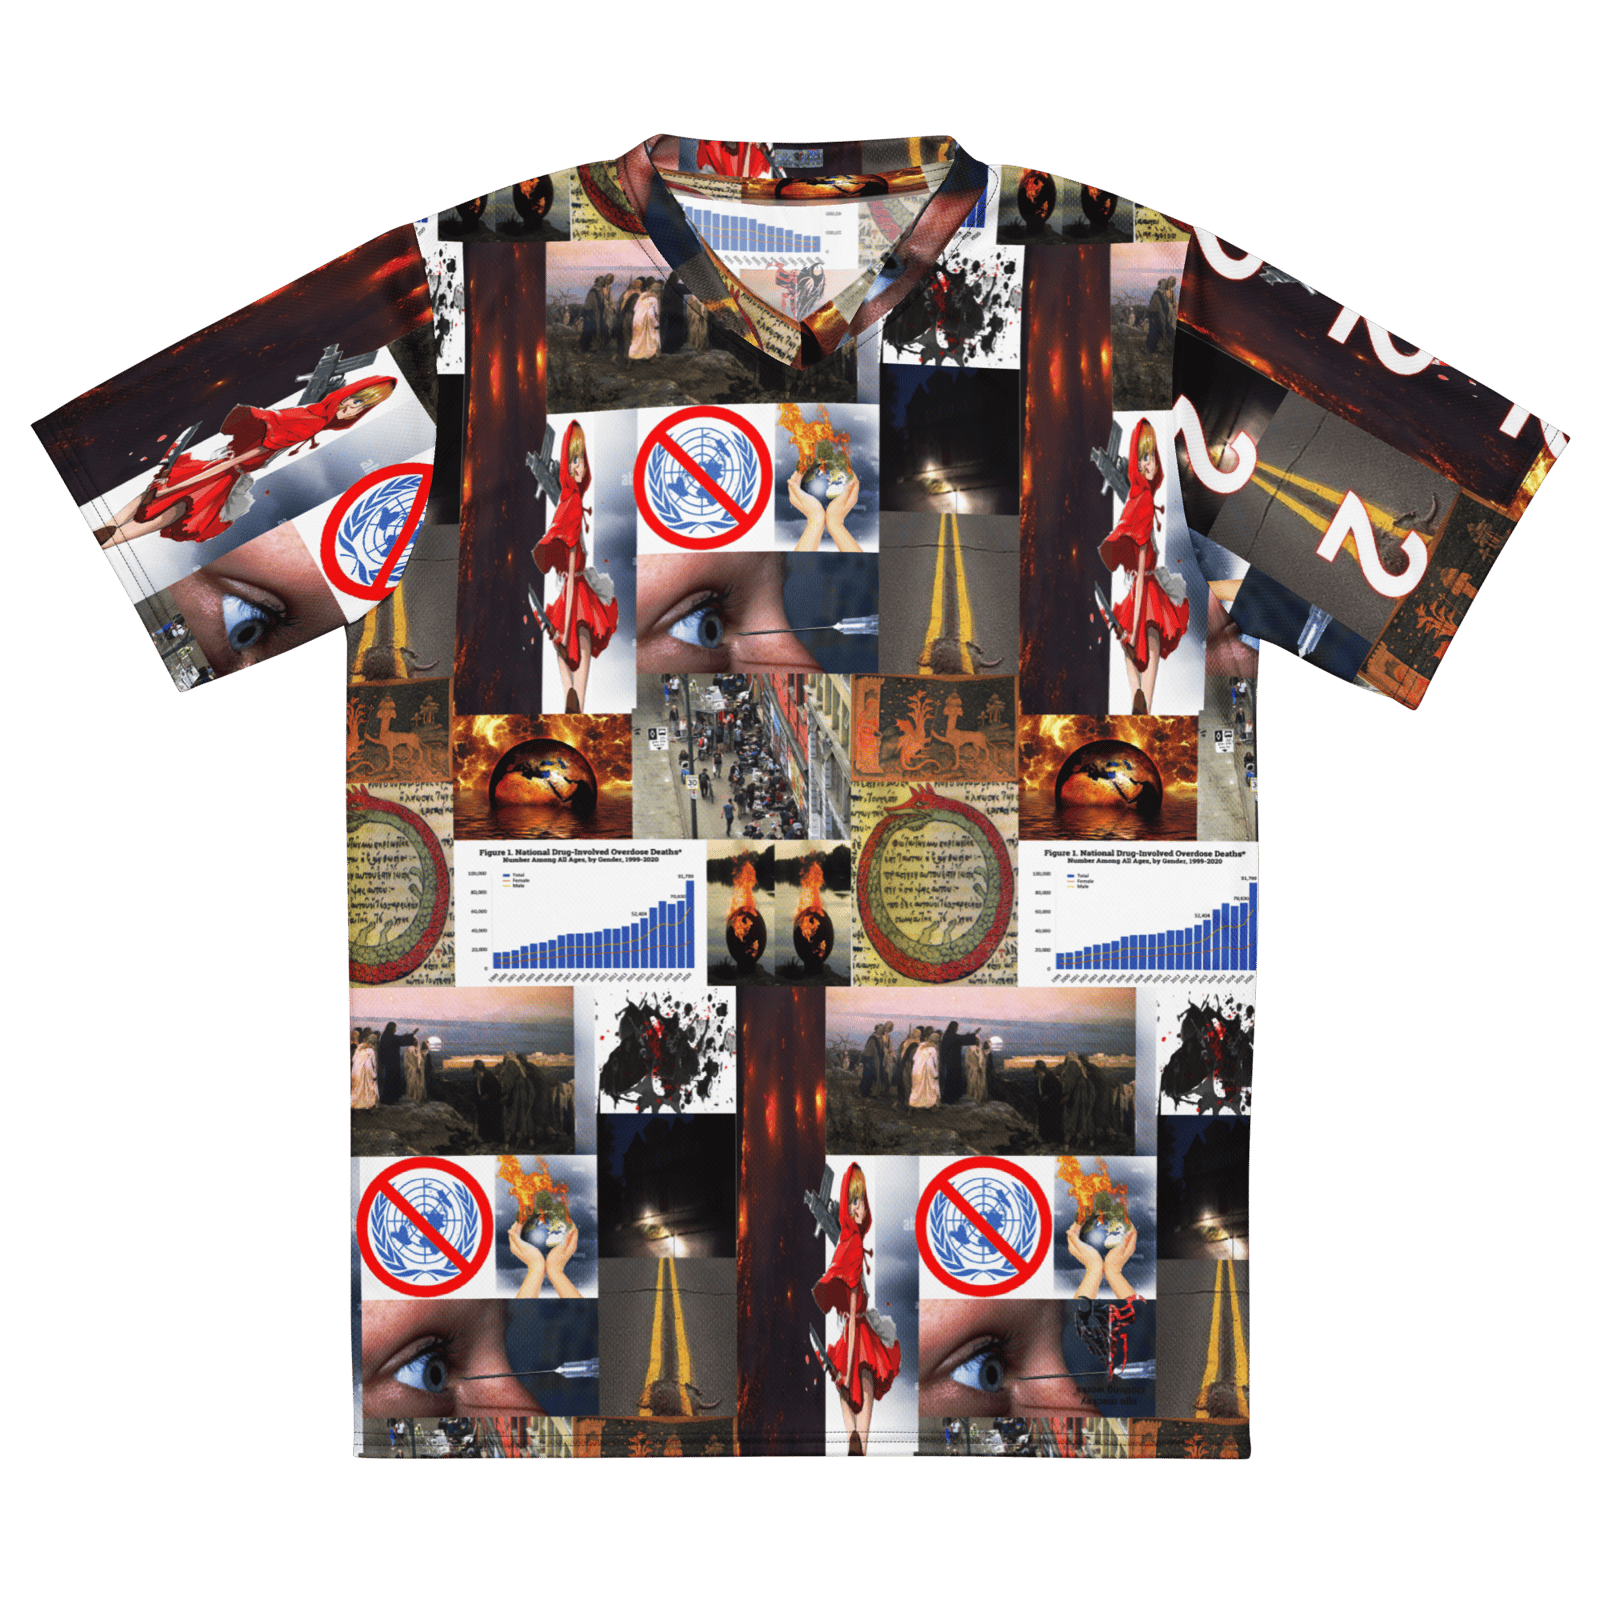 end times collage recycled sports jersey | …φ(。。*) ego mackey 